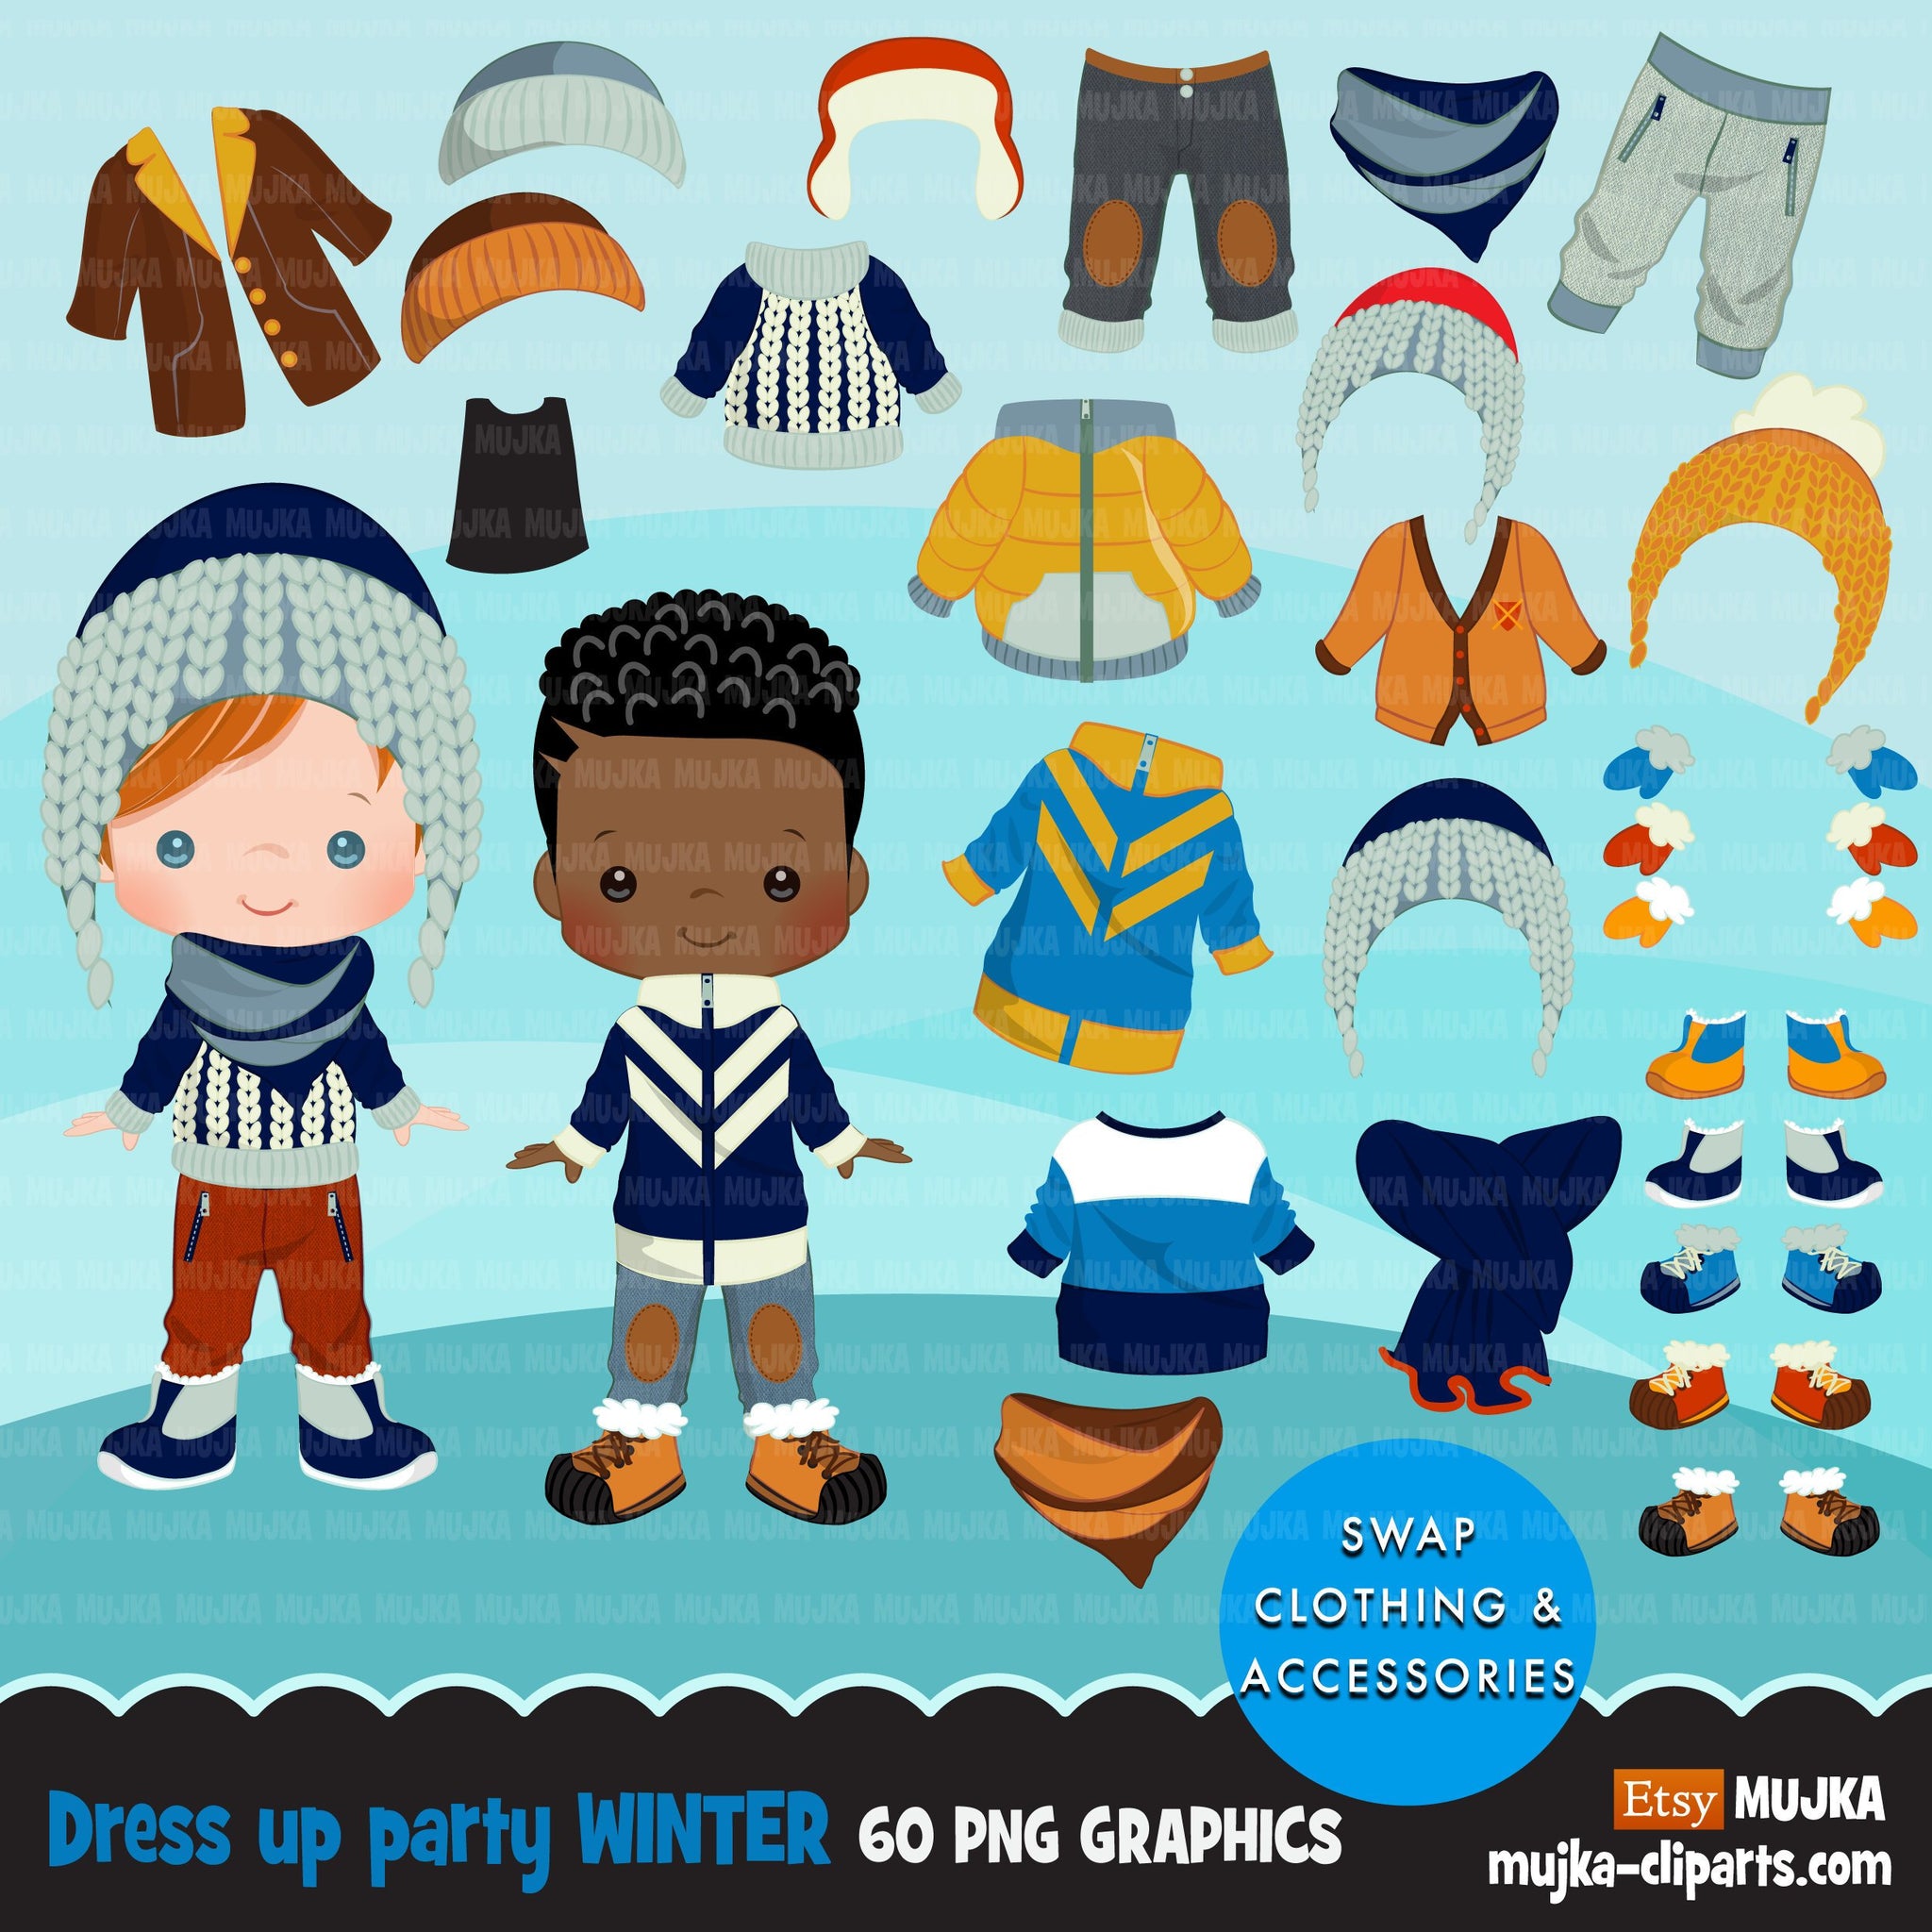 Paper doll clipart, Winter outfits, winter Dress up Party, boy fashion, black boy, png clip art, commercial use sublimation graphics